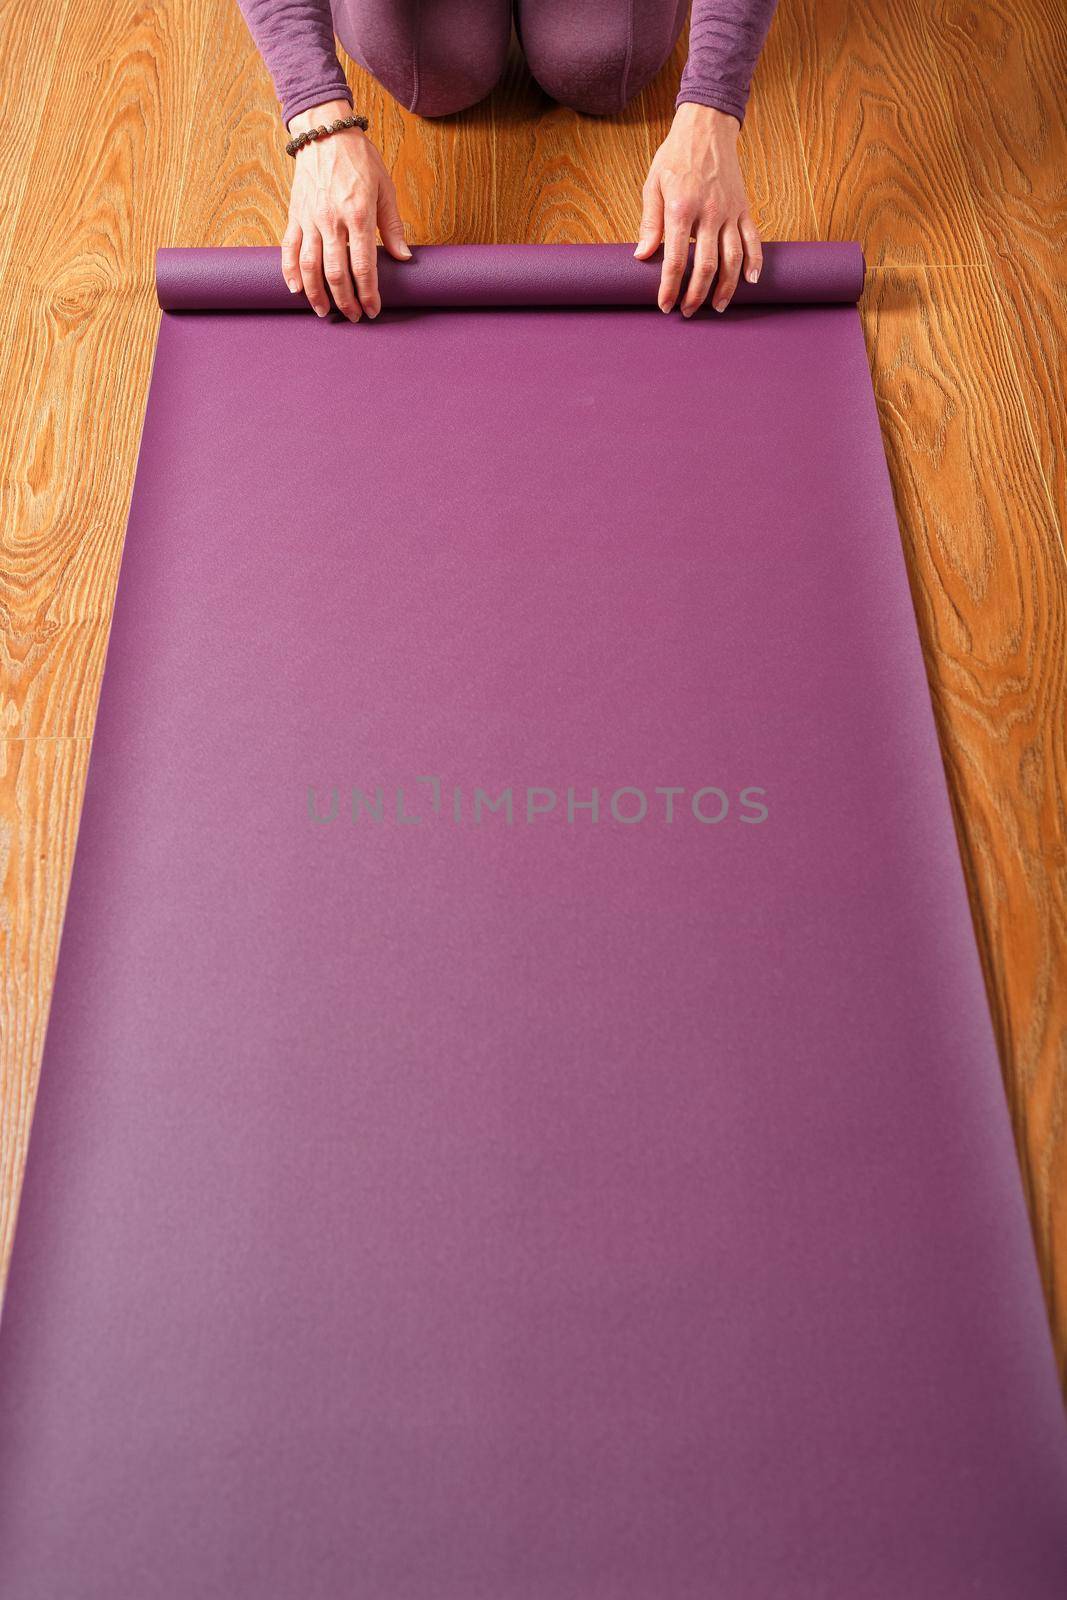 A woman's hands fold a lilac yoga or fitness mat after a workout at home in the living room. by AlexGrec